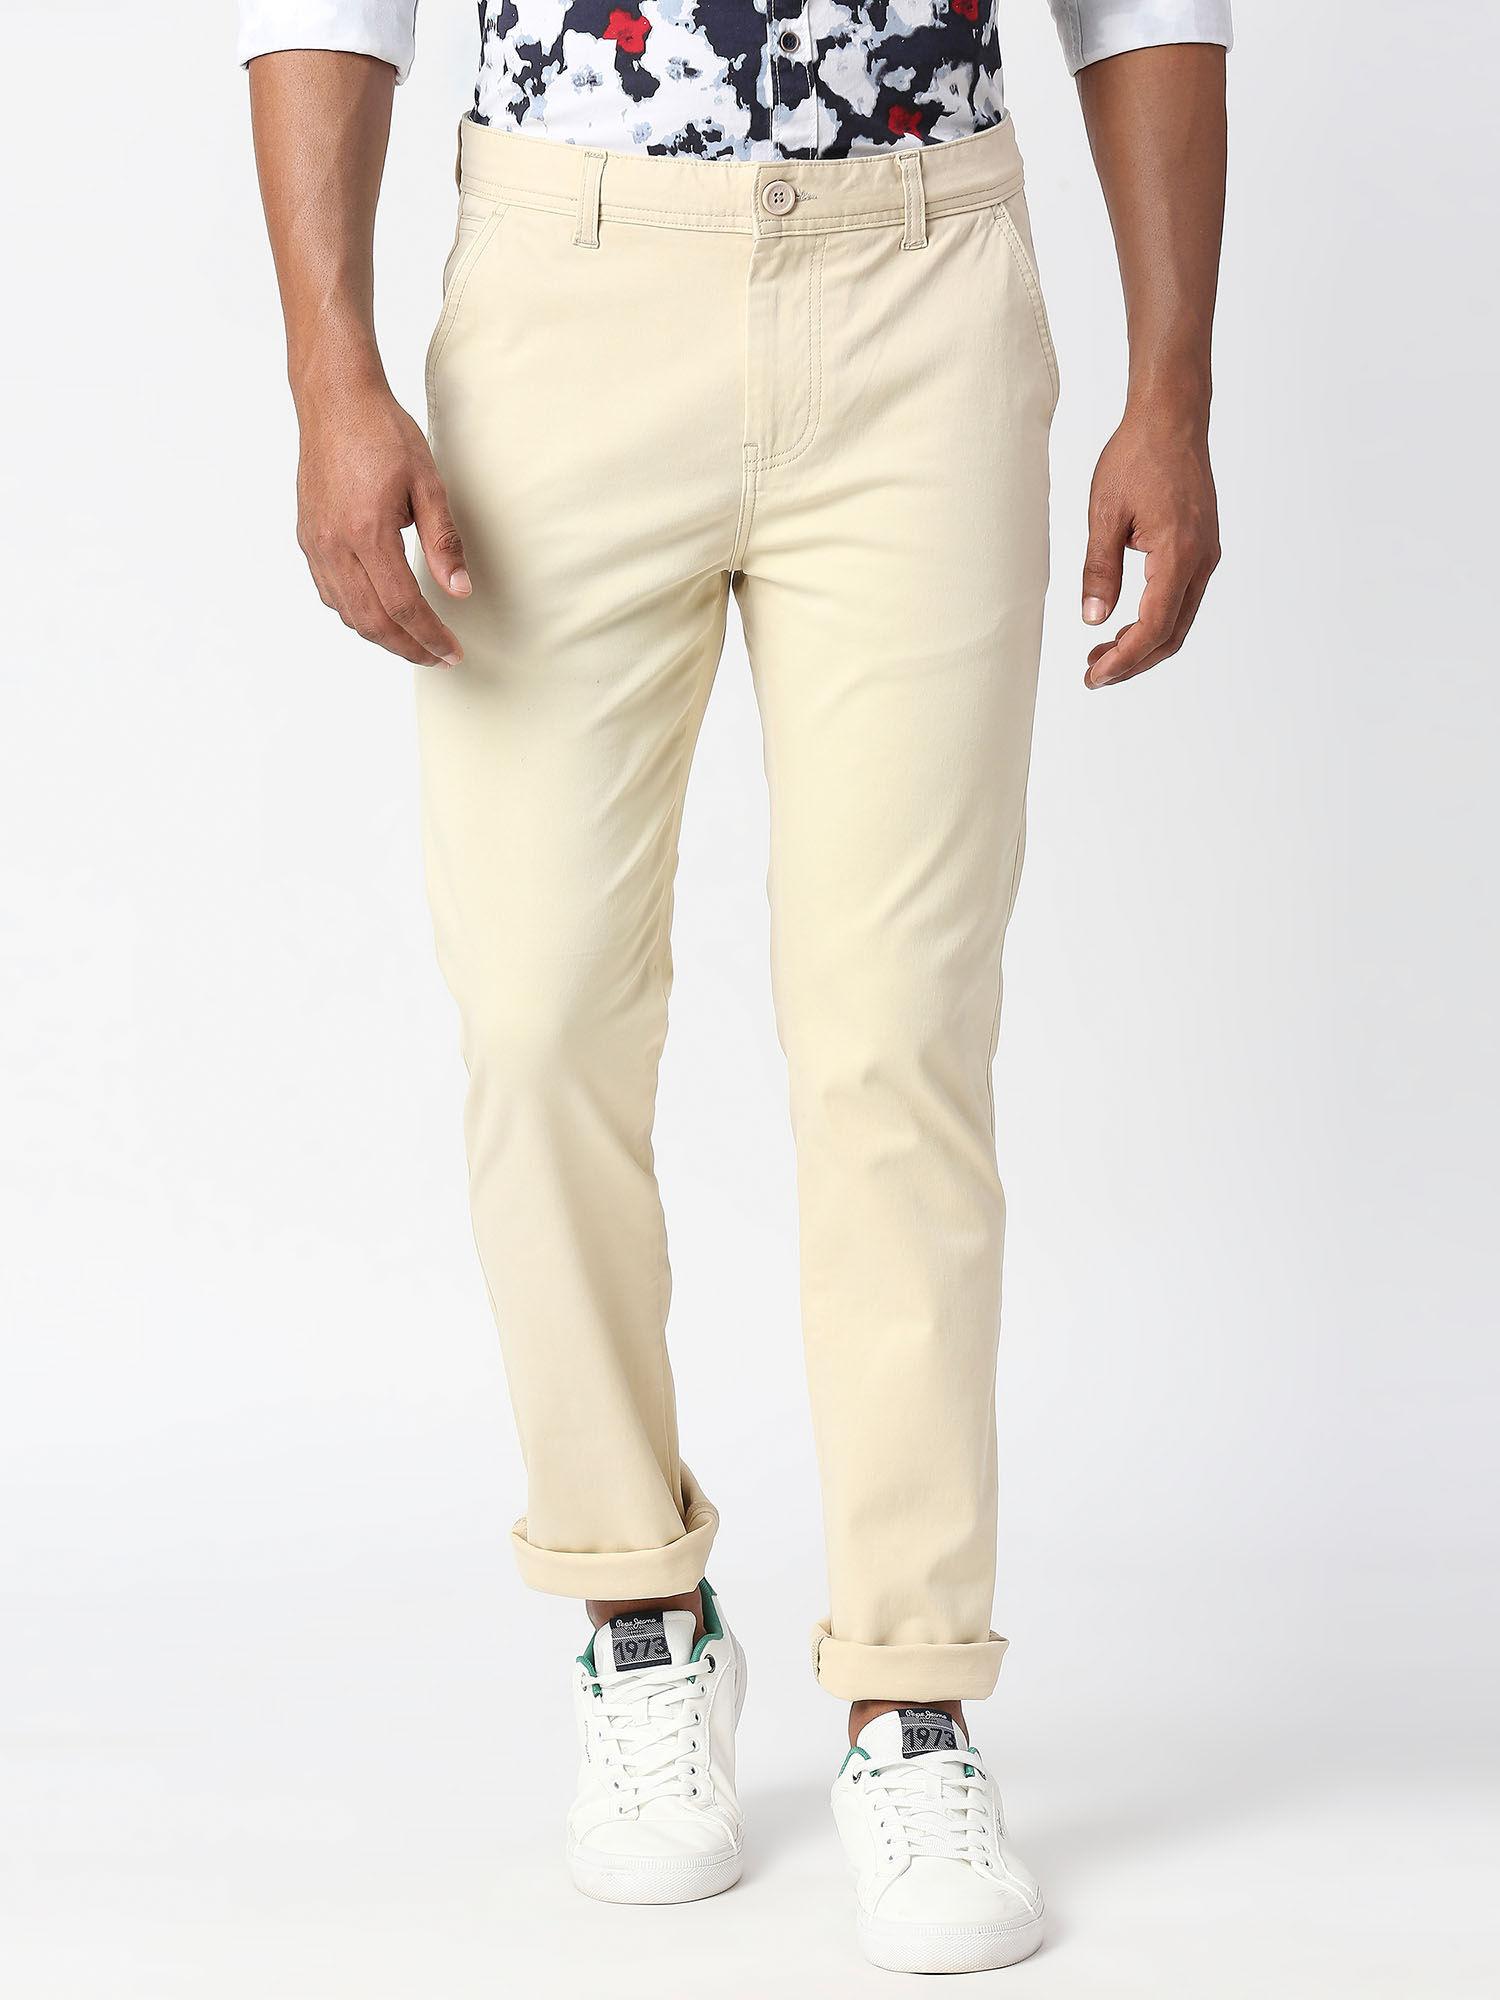 mullet-casual-chinos-pants-beige